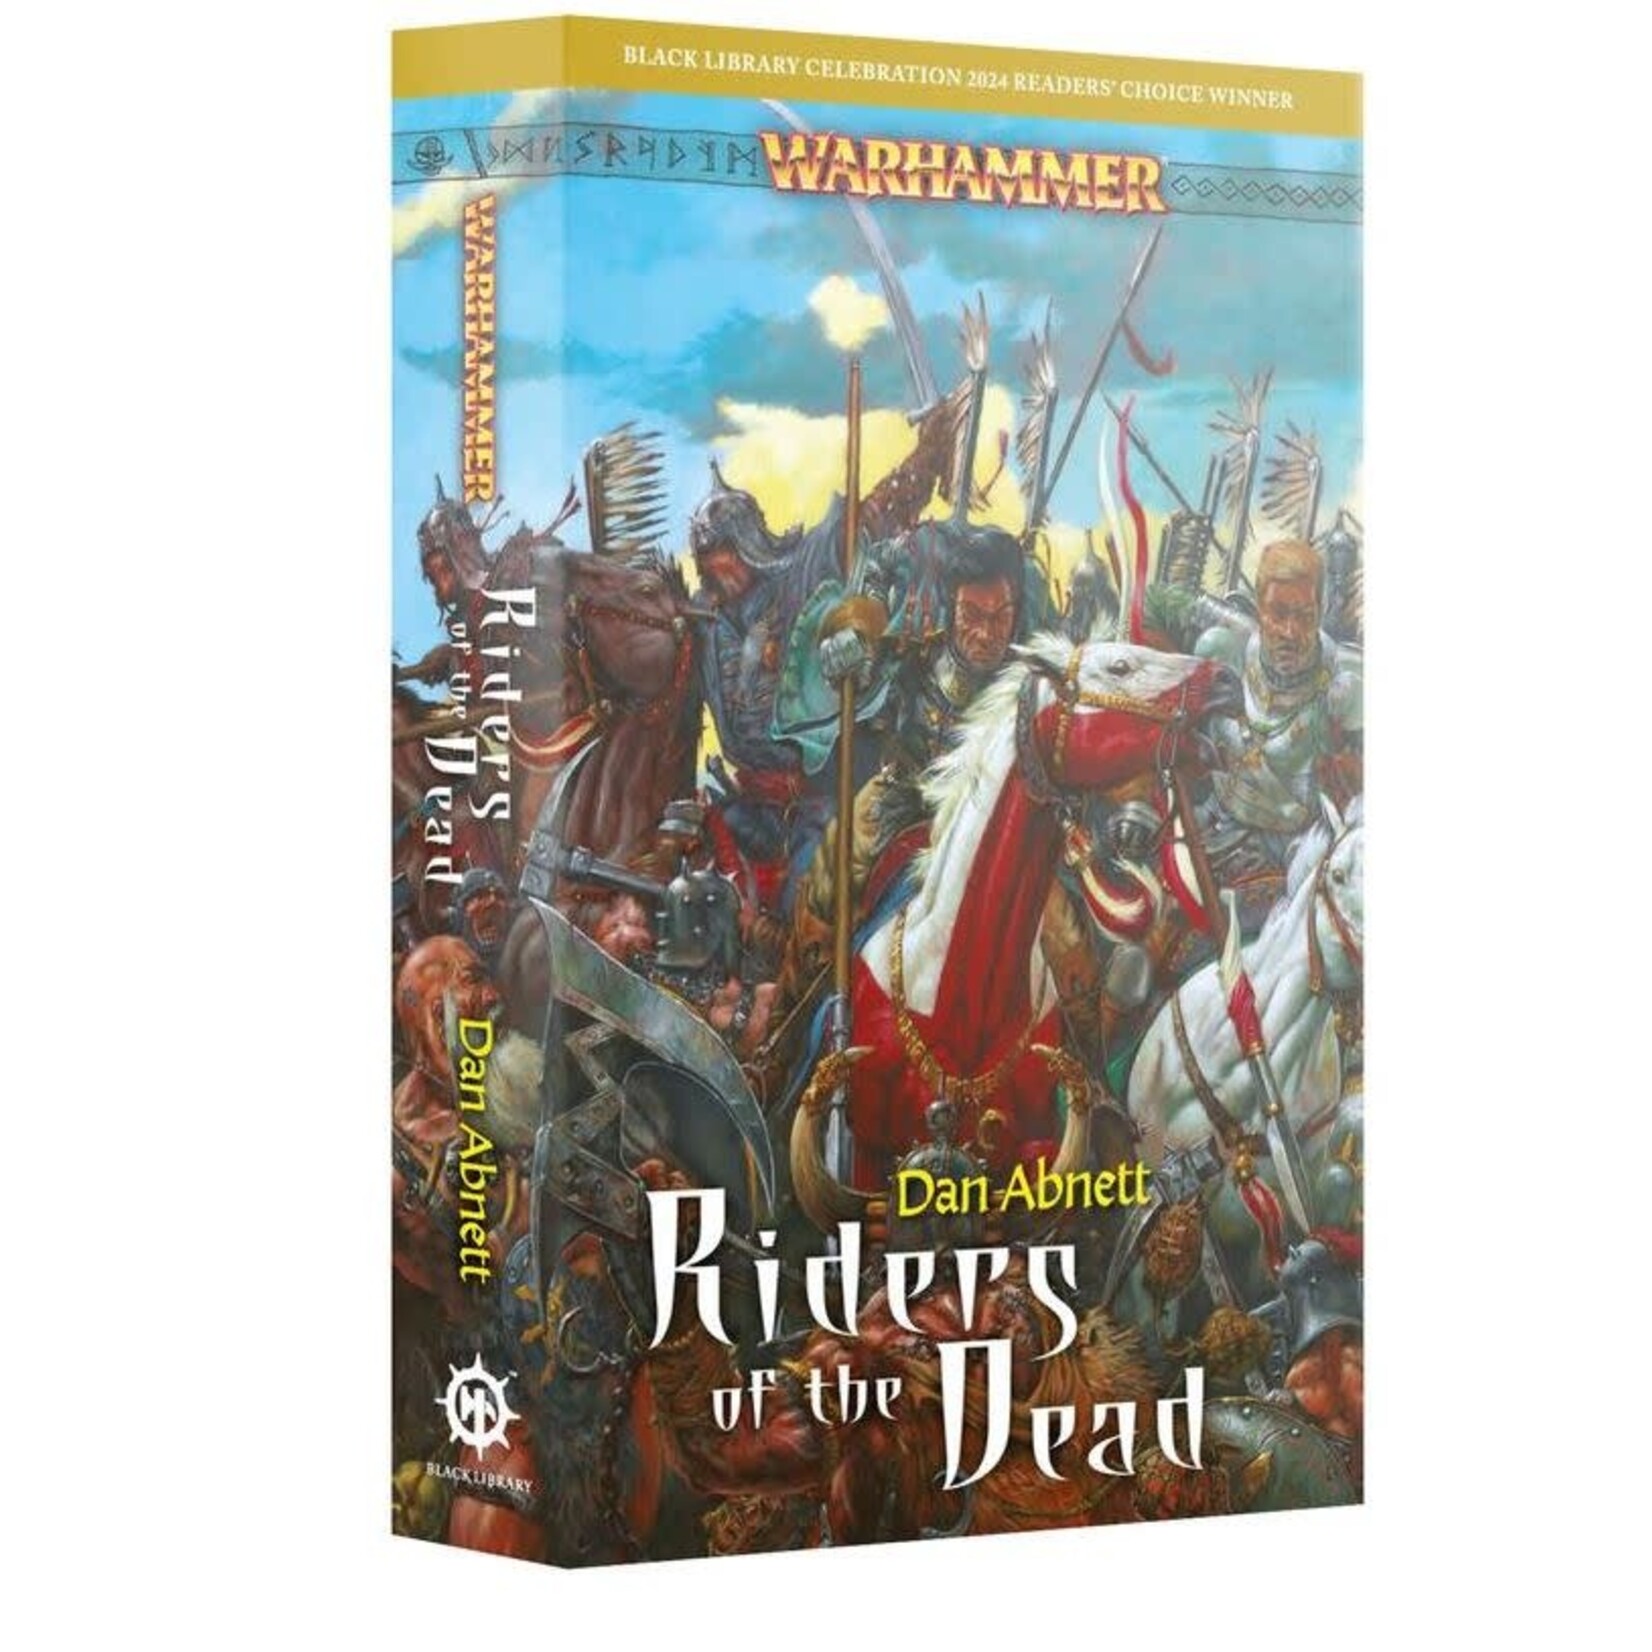 Riders of the Dead (Paperback)